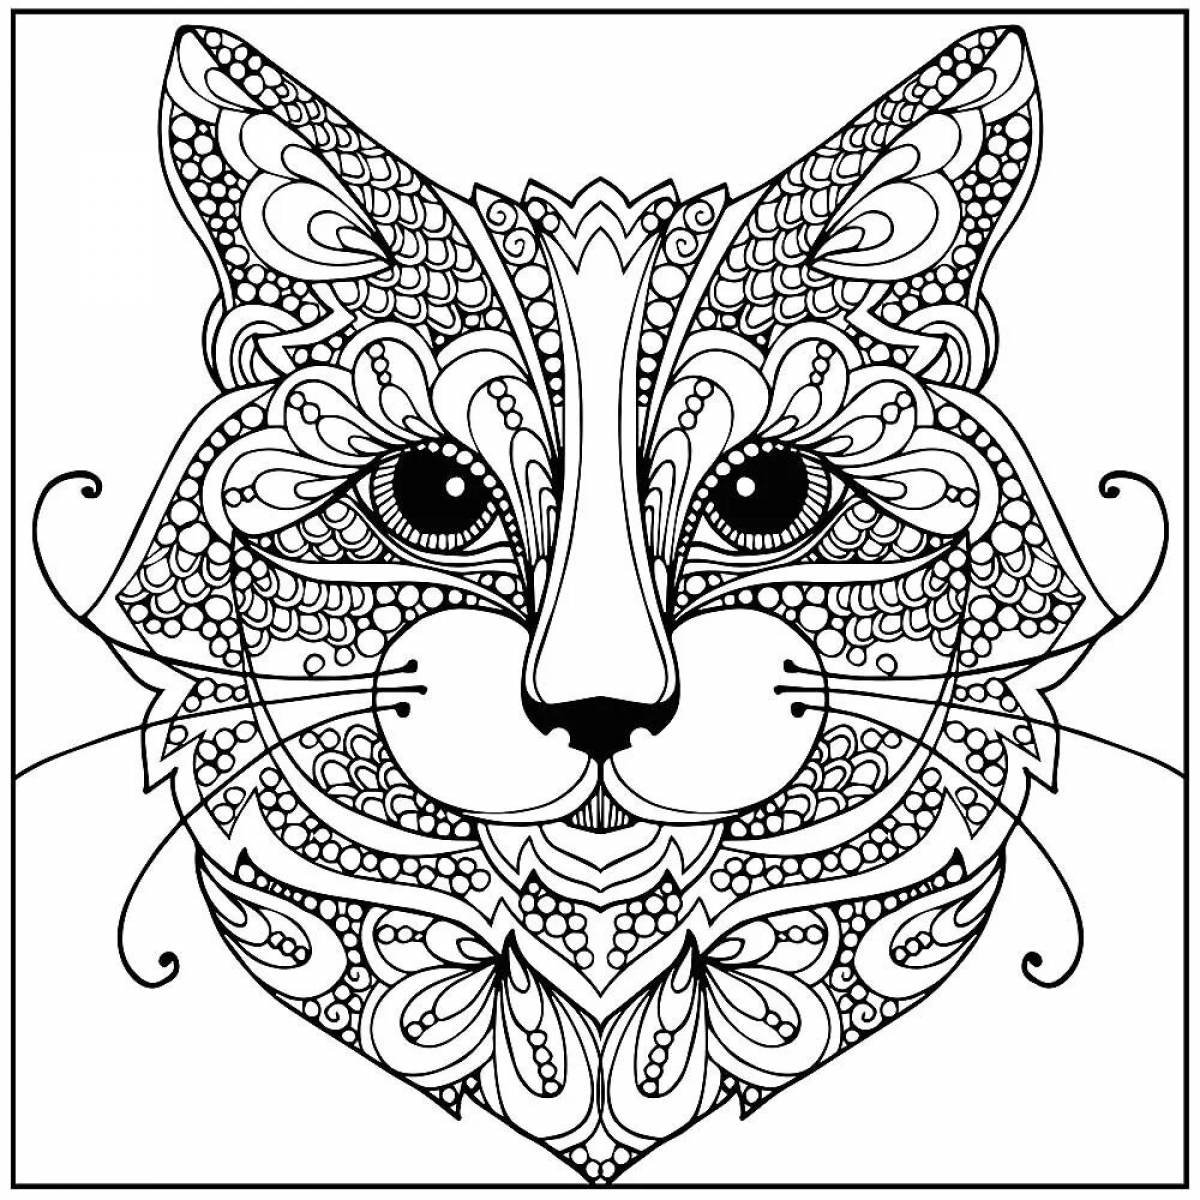 Coloring book mystical anti-stress complex of animals